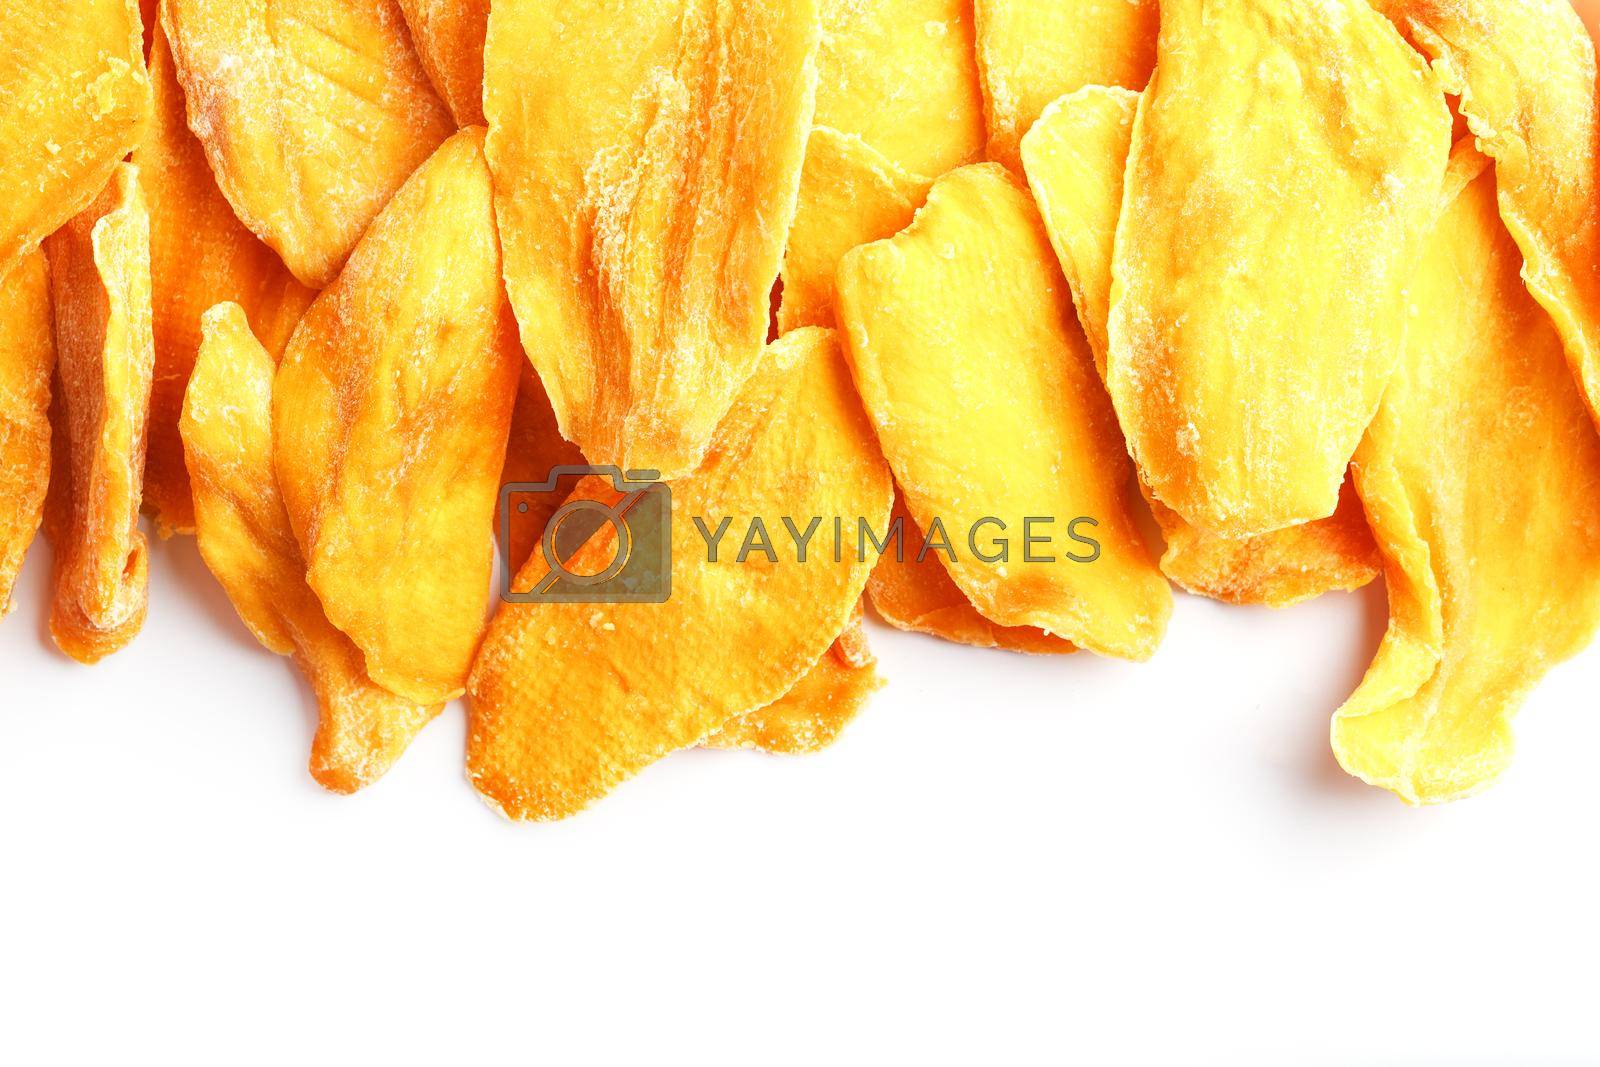 Royalty free image of Dried mango sliced on a white background with free space by AlexGrec